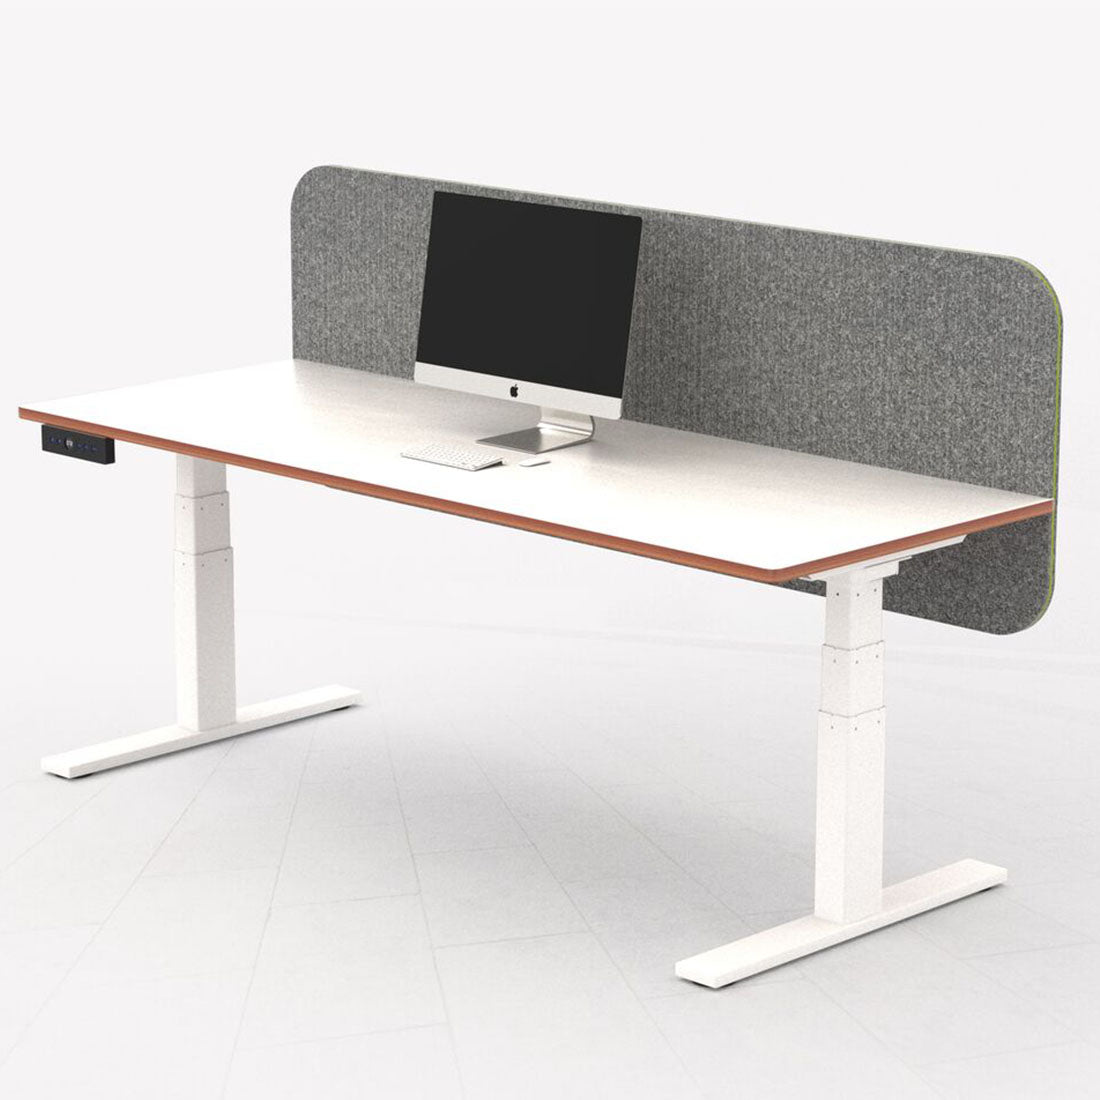 Zorb Desk Mounted Acoustic Screen - switchoffice.com.au